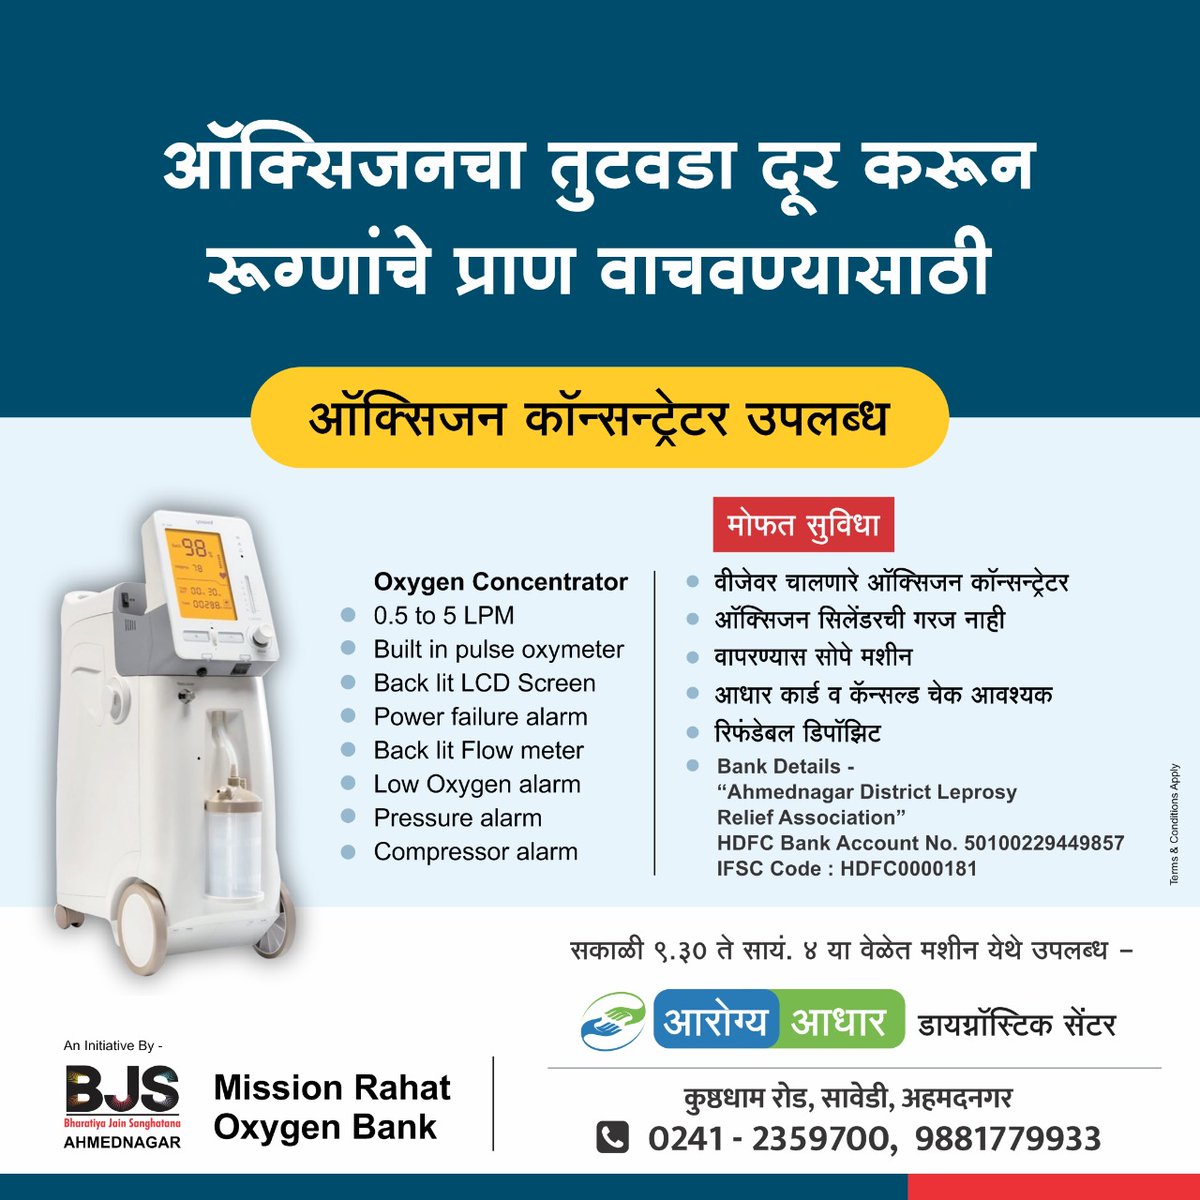 Availability of Oxygen Concentrator in Ahmednagar.
Please retweet to amplify and help the needy #ahmednagar #OxygenConcentrator #CovidIndiaInfo #Covidhelp #CovidResources @BeingNagari @ilovenagar @Ahmednagarkar @RTAhmednagar @BloodAhmednagar @BJS_India @hemantraomulay